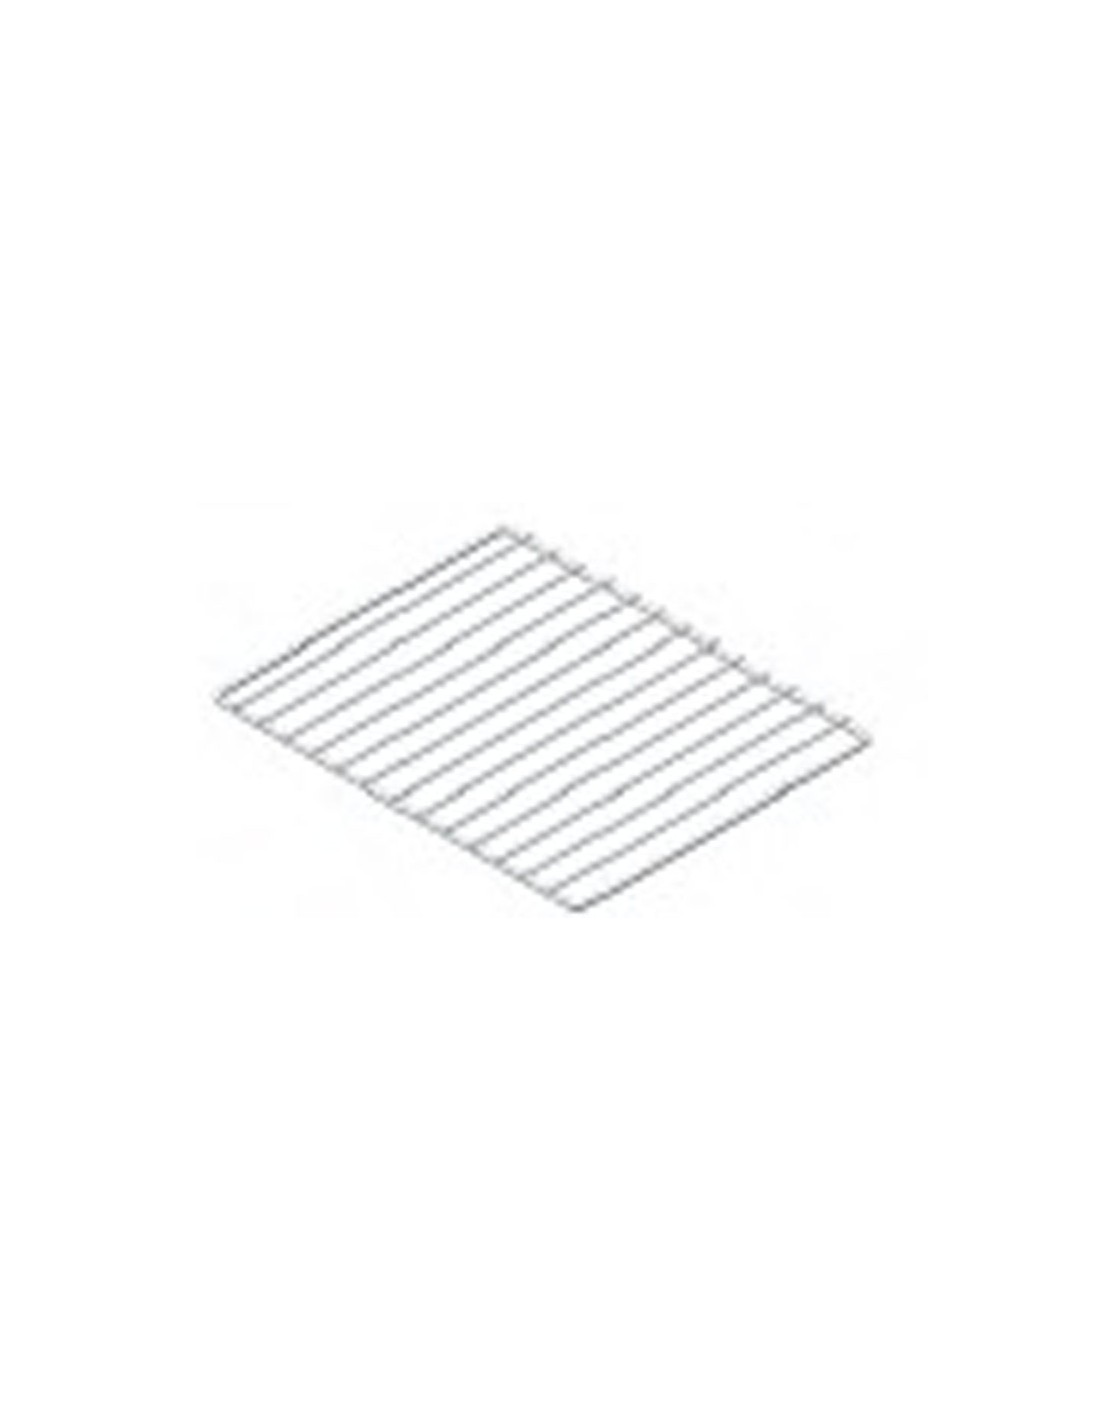 Chrome plated horizontal grill - For GN1/2 ovens - cm 26.5 x 33.1 x 0.81 h